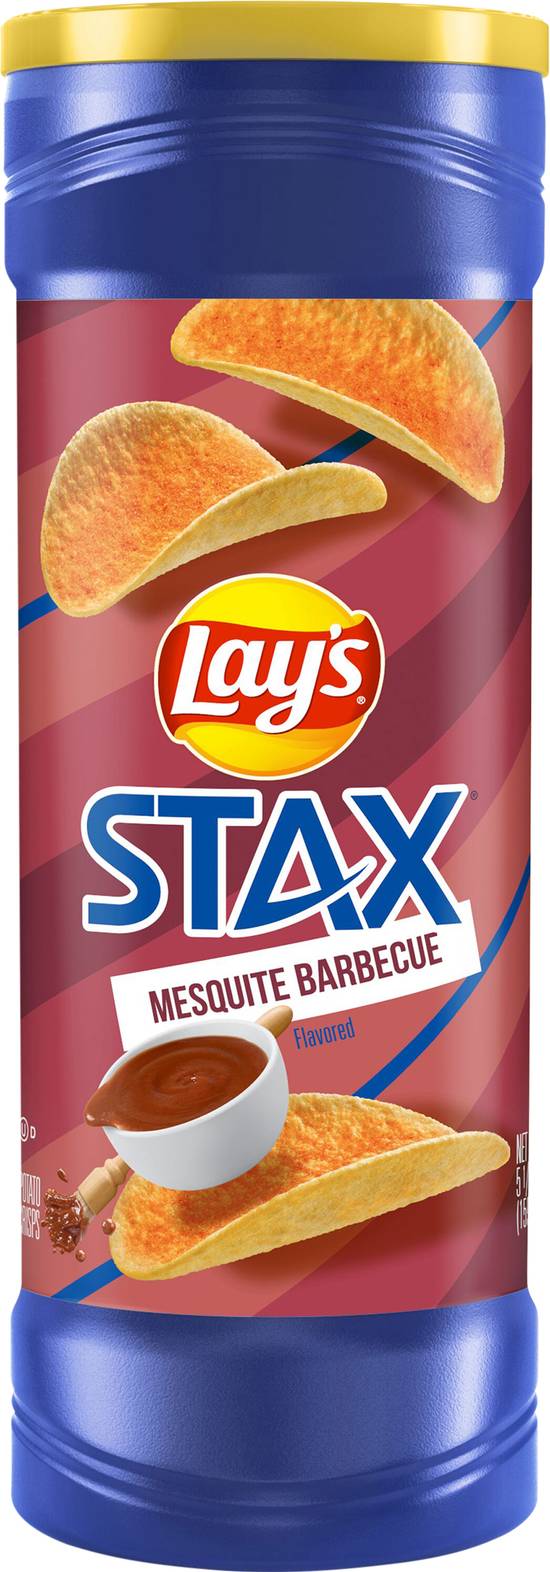 Lay's Stax Mesquite Barbecue Flavored Potato Chips